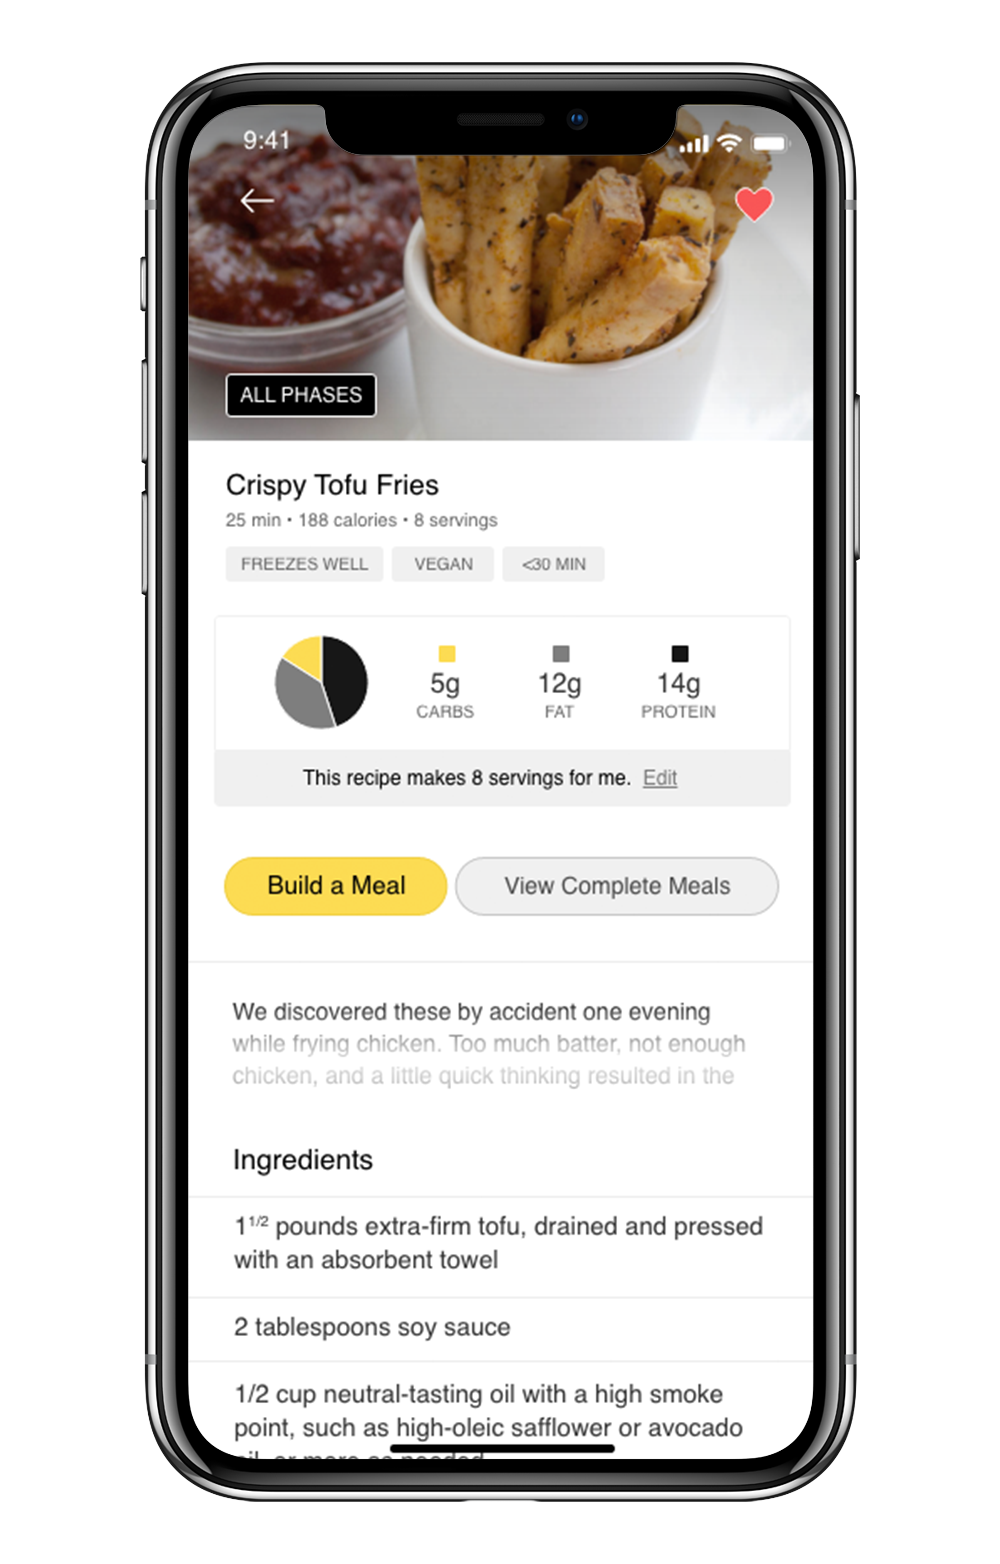 App page showing details of a recipe.